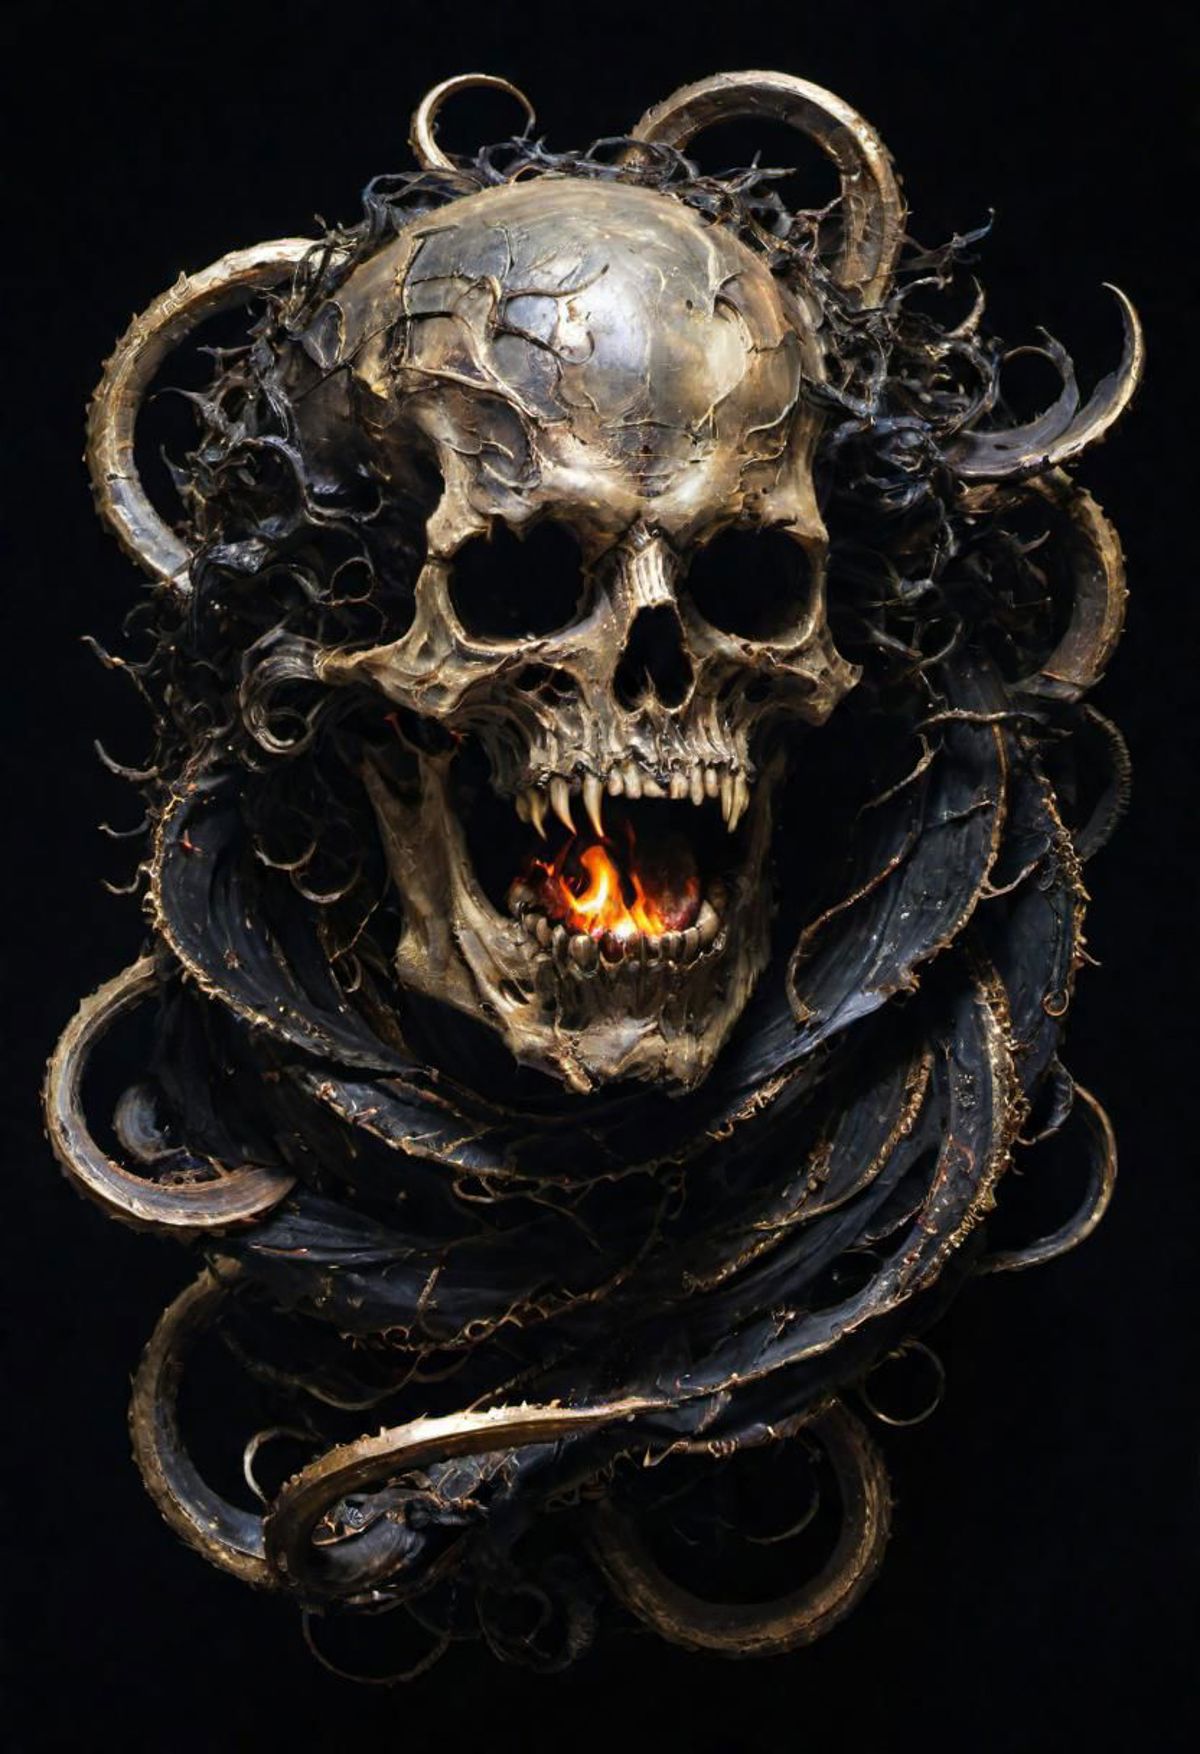 A skull with a snake wrapped around it and flames coming out of its mouth.